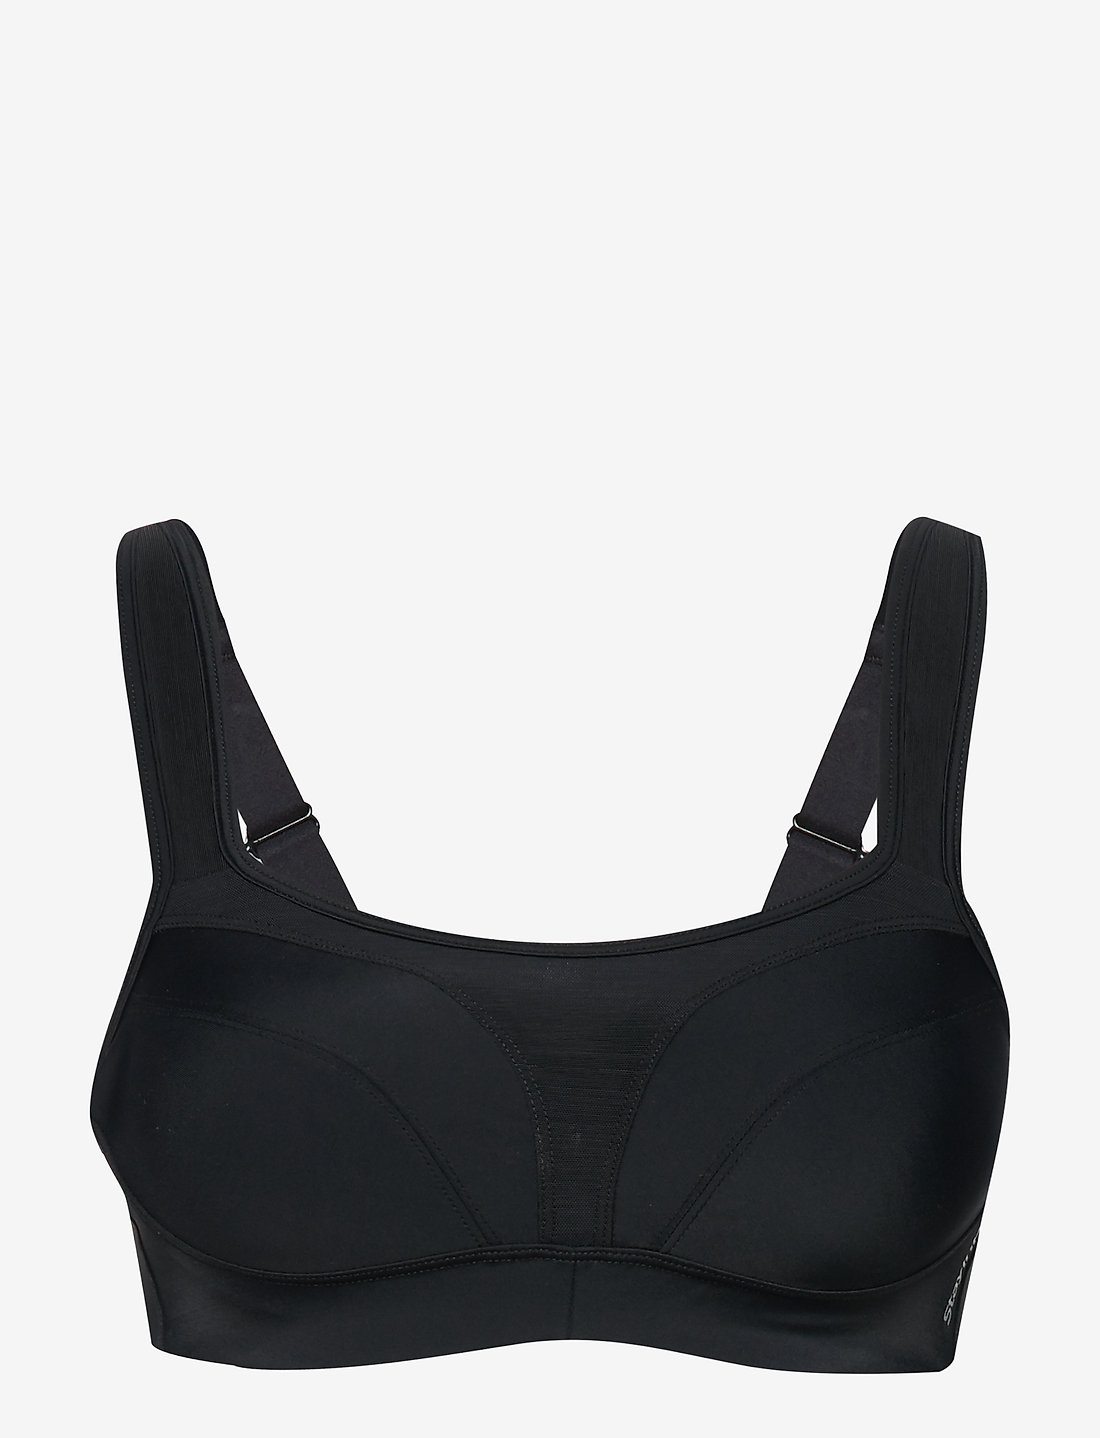 Stay In Place High Support Sp Bra (Black) – 31.32 € –